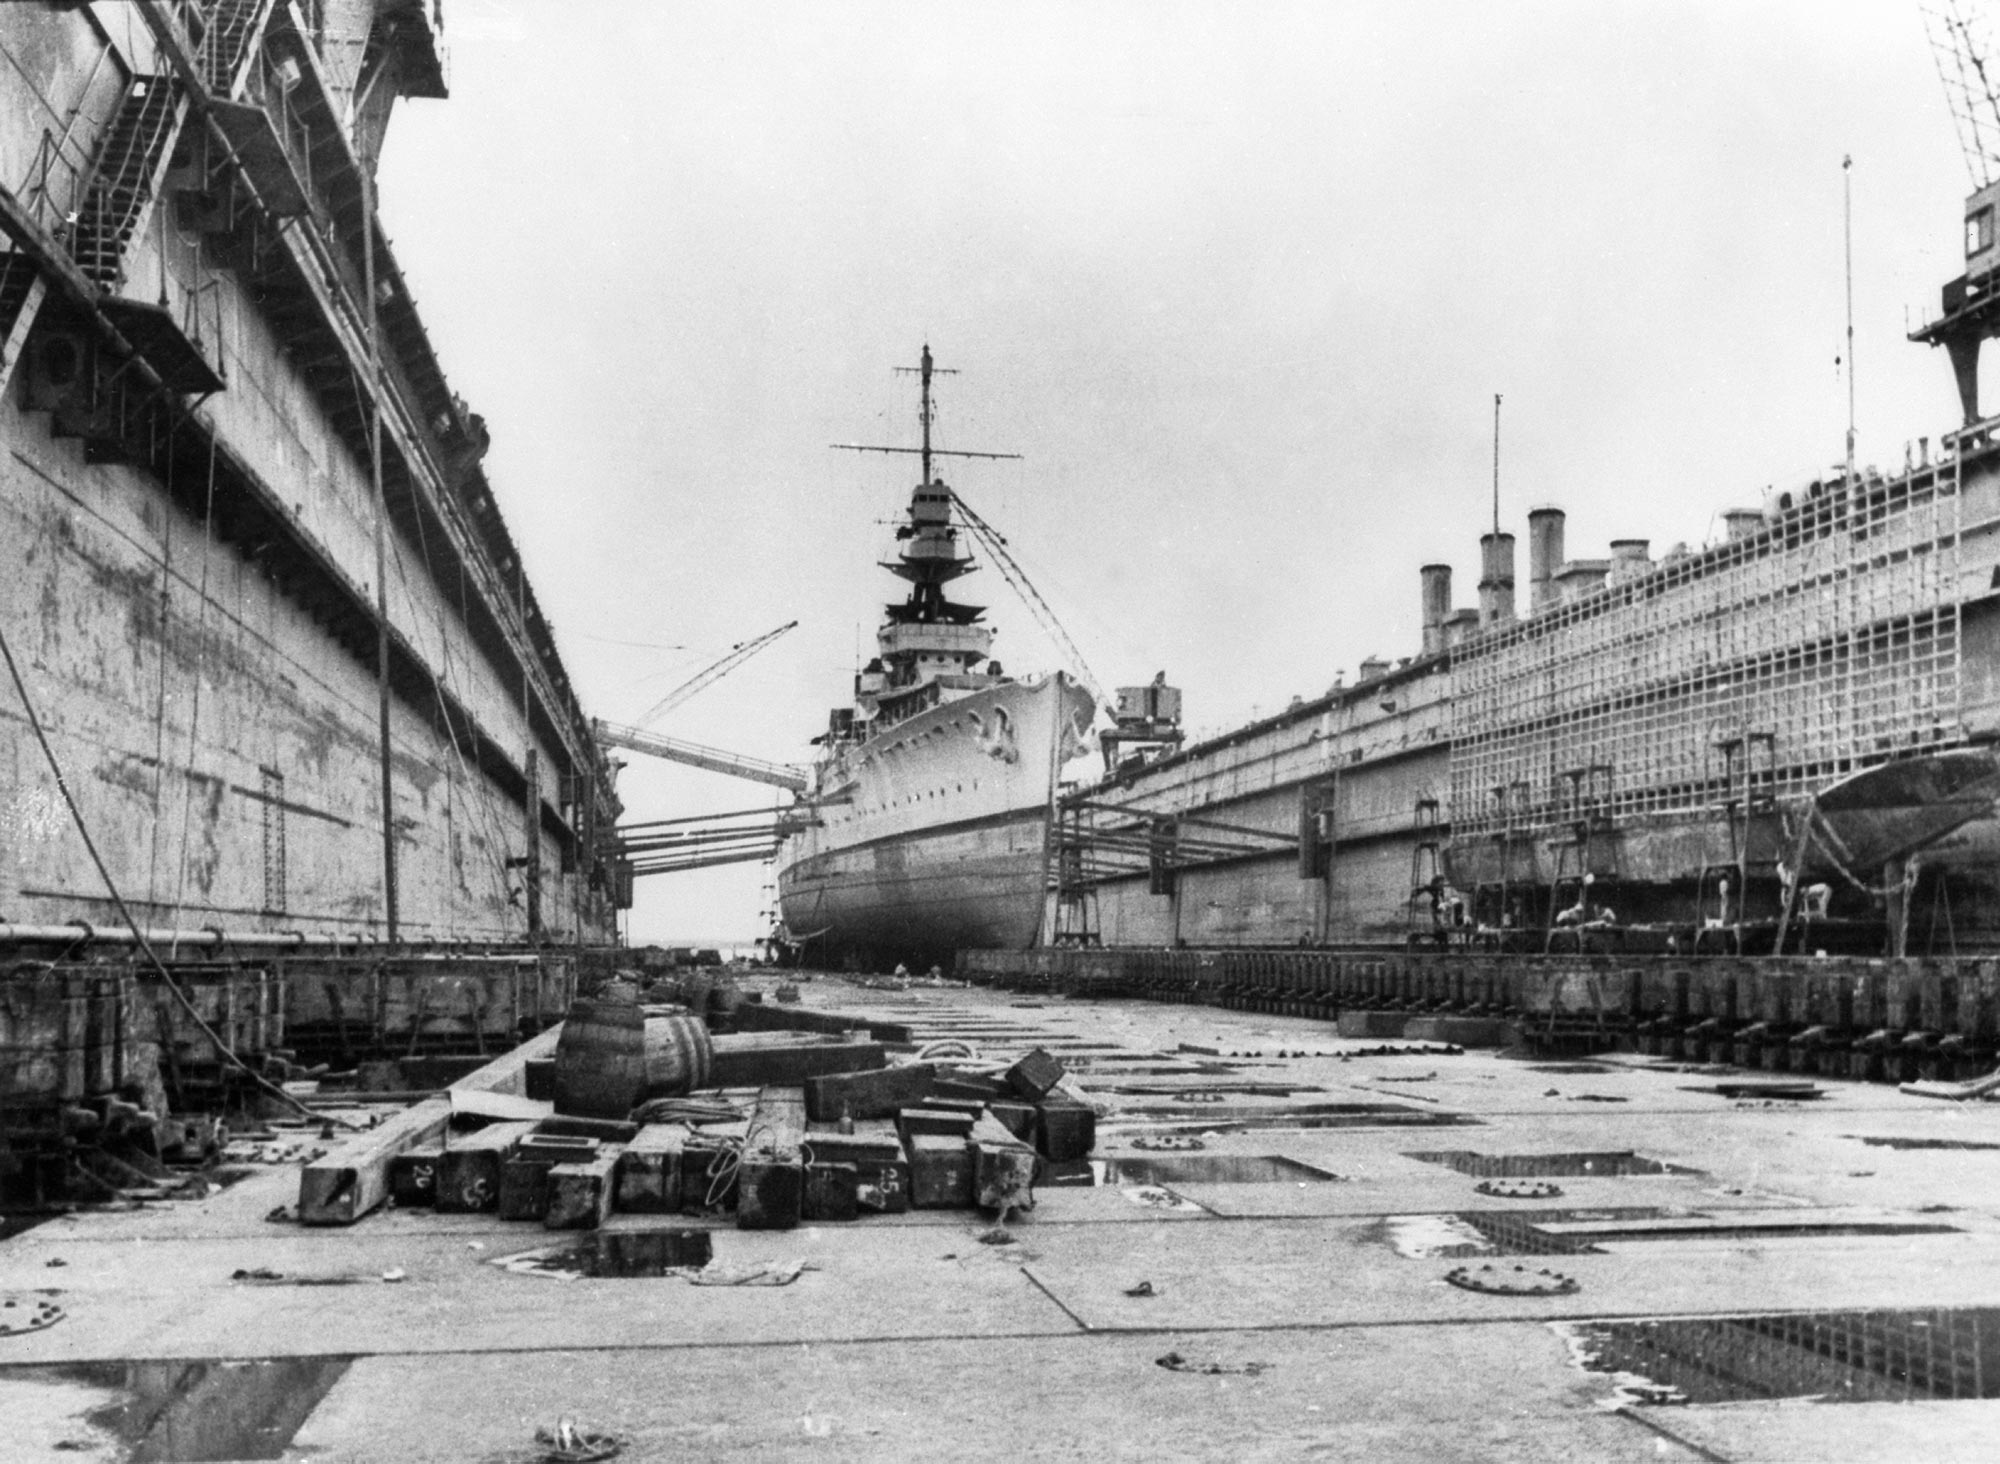 <p>A British warship being refitted in a floating dock at Singapore naval base, 1940s</p>
